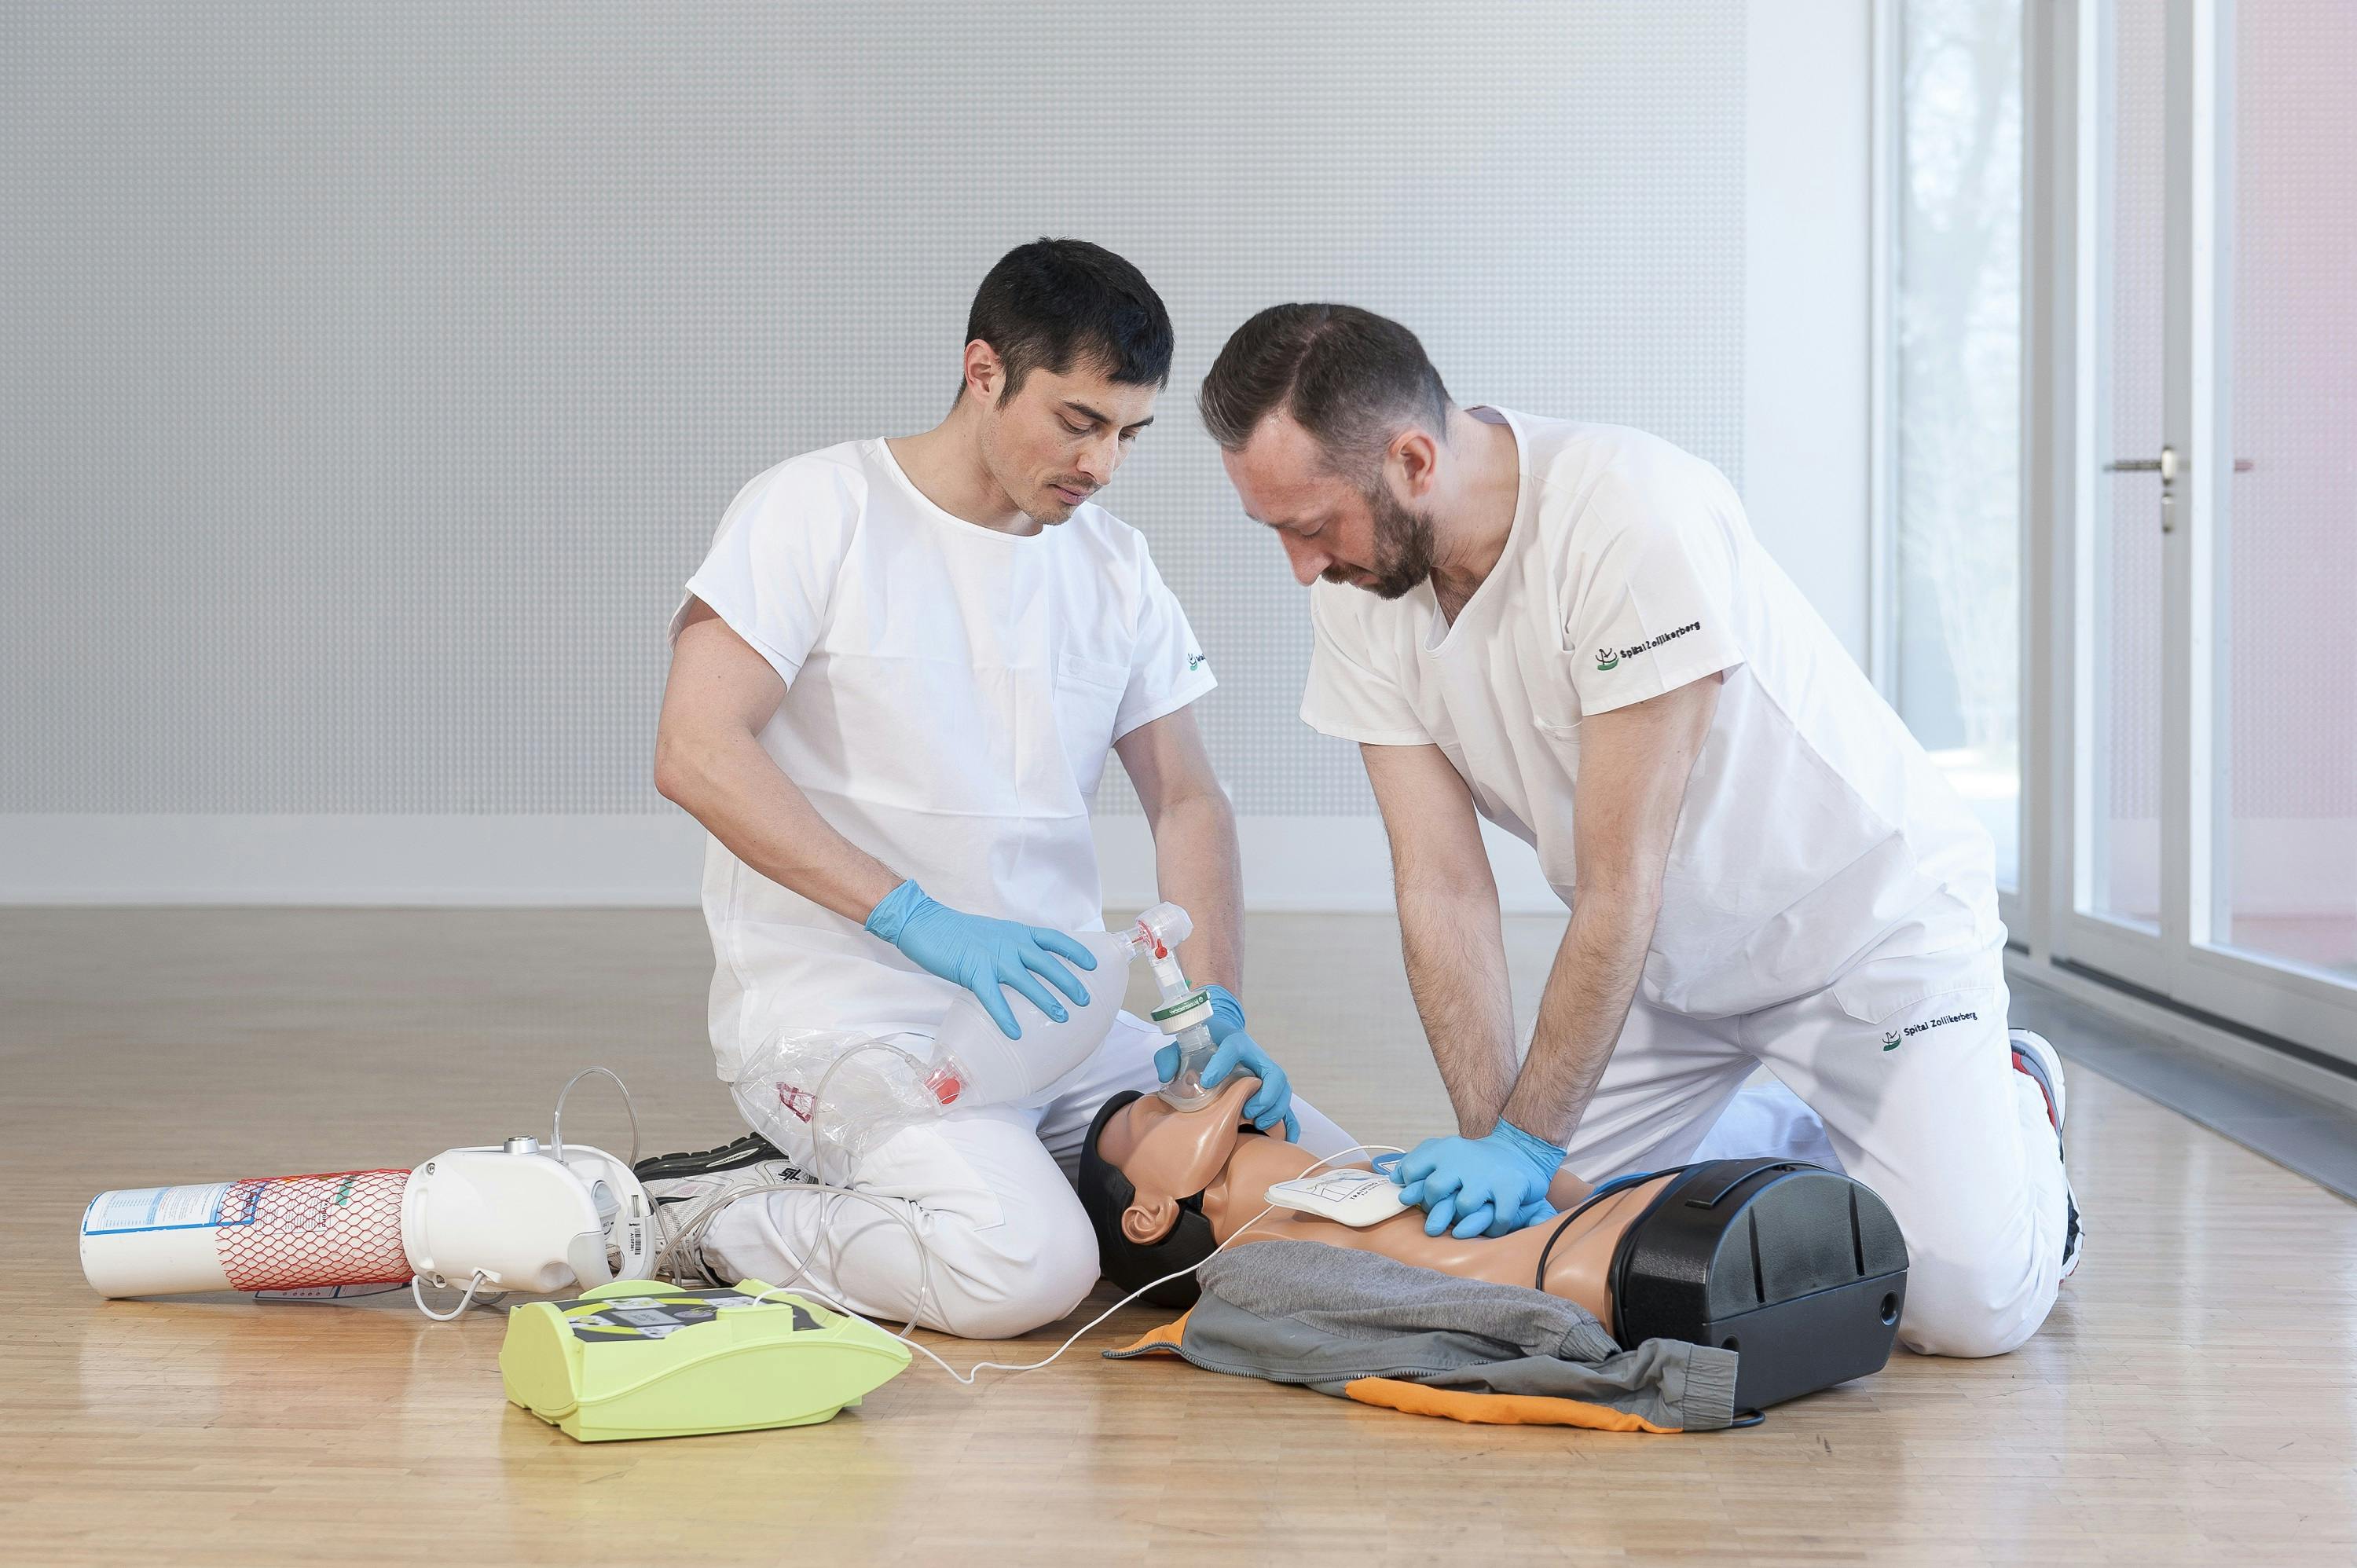 Two paramedics carry out resuscitation measures on a manikin.